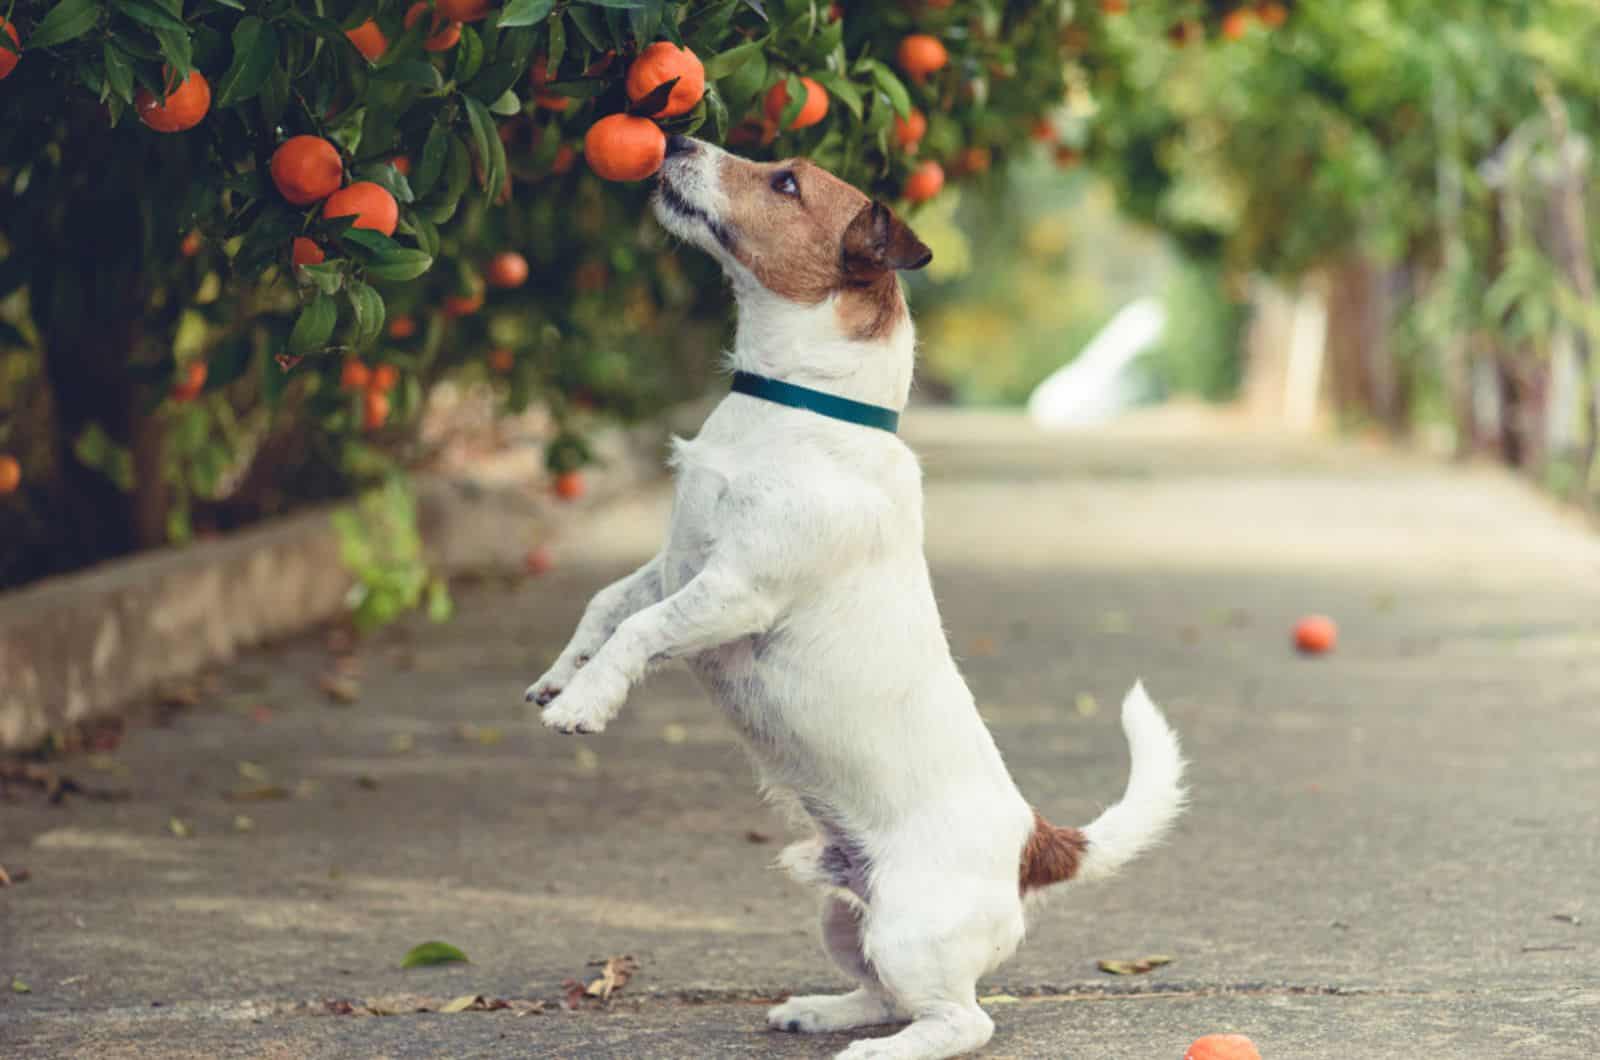 dog trying to steal tangerines from tree branch